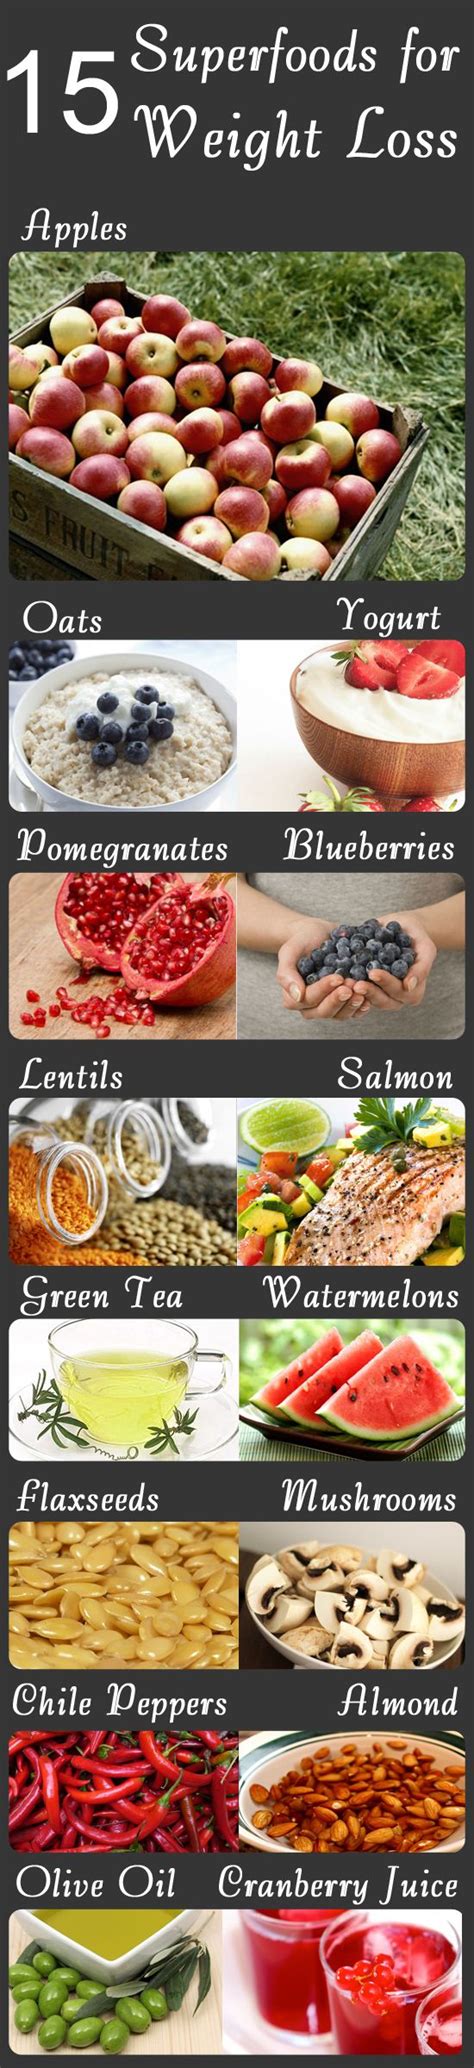 Weight Loss Foods Let Us Look At 10 Such Super Foods That We Can Easily Incorporate Into Our